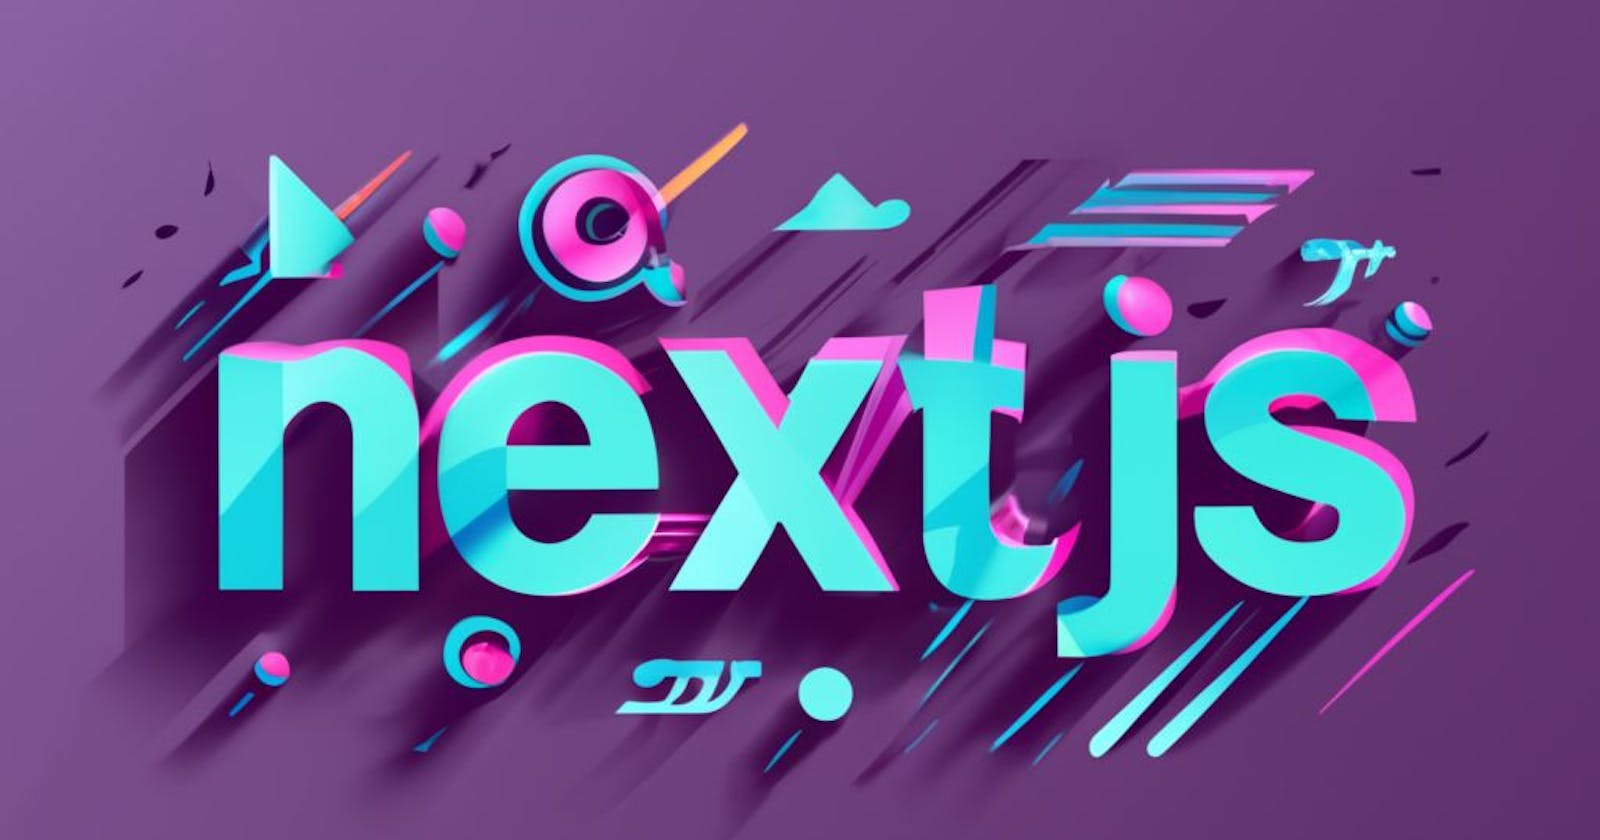 How to start with Next.js?